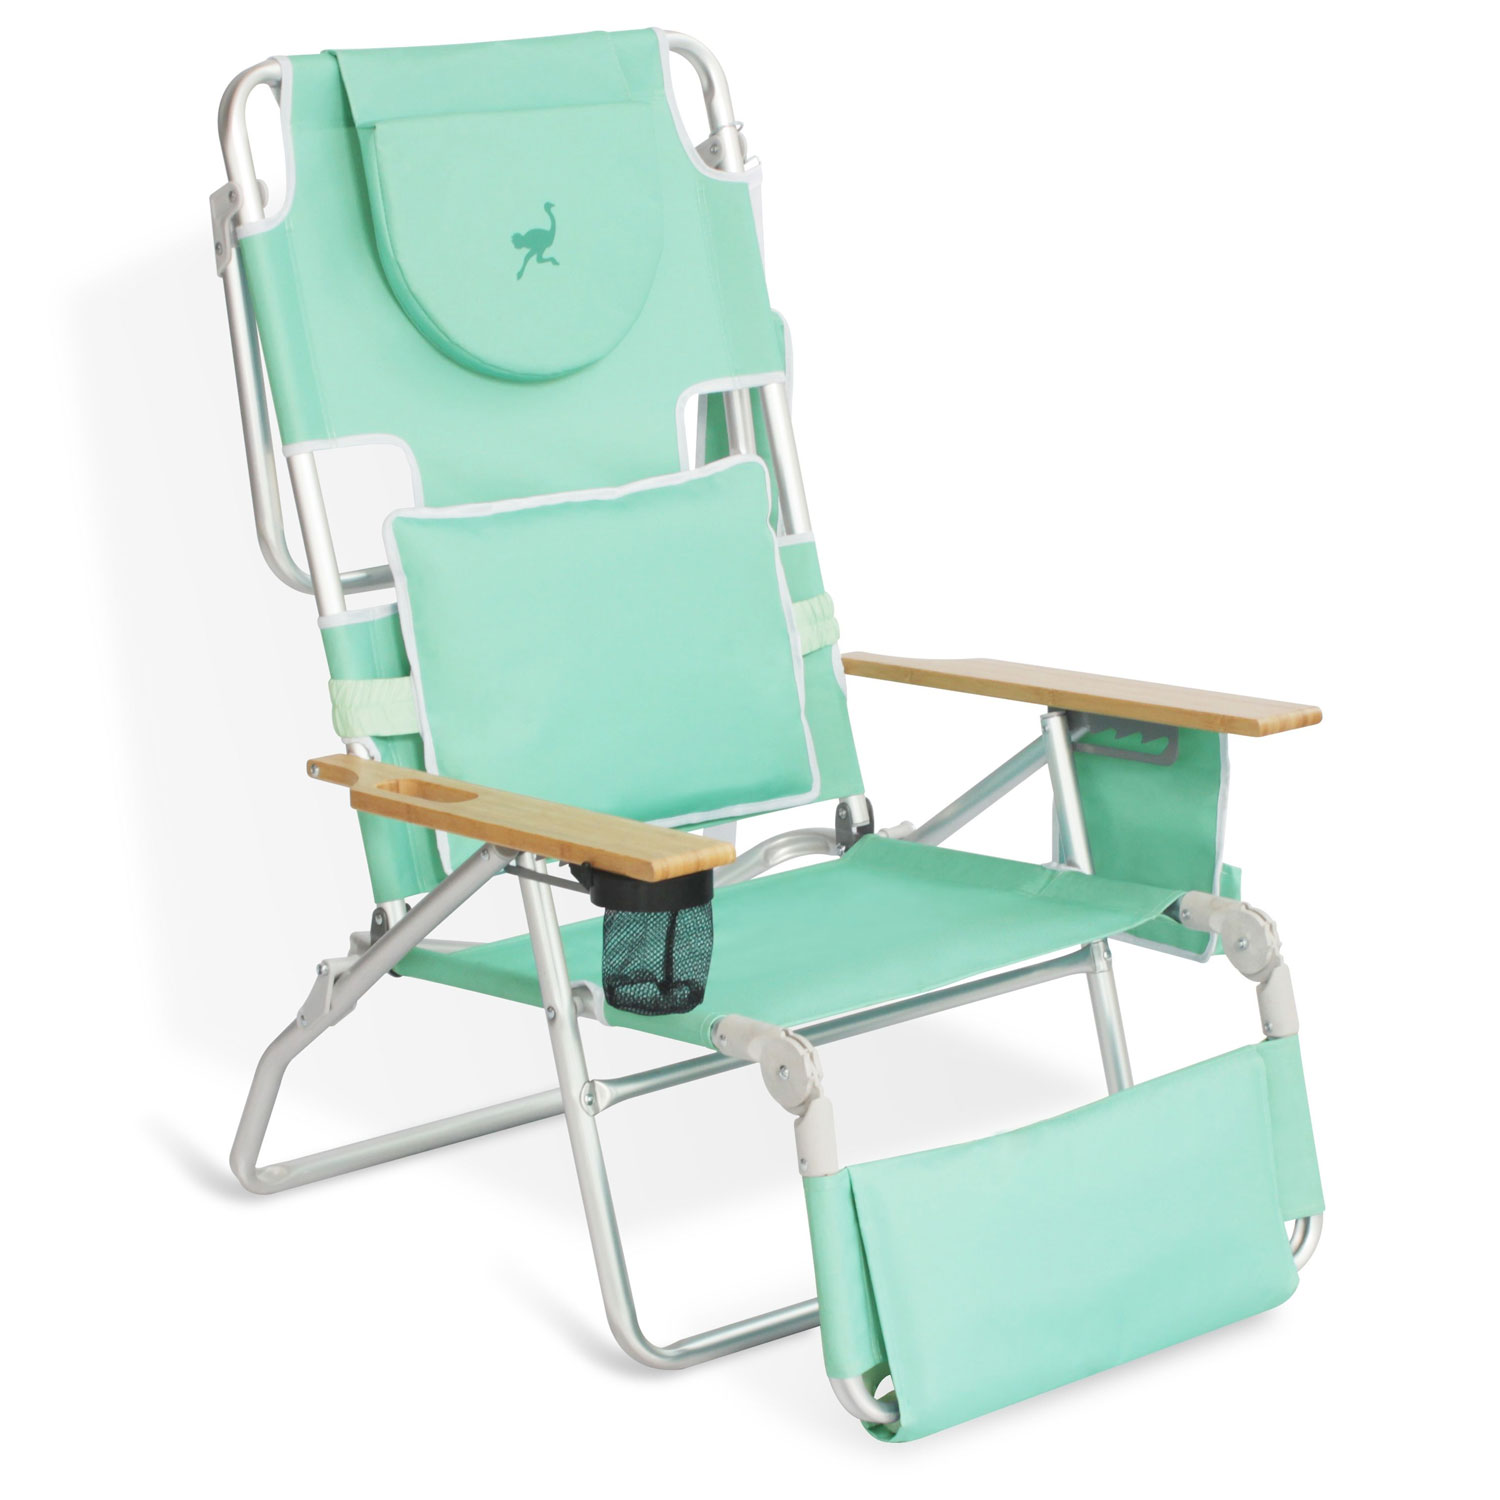  Ostrich Deluxe Face Down 3 In 1 Beach Chair with Simple Decor